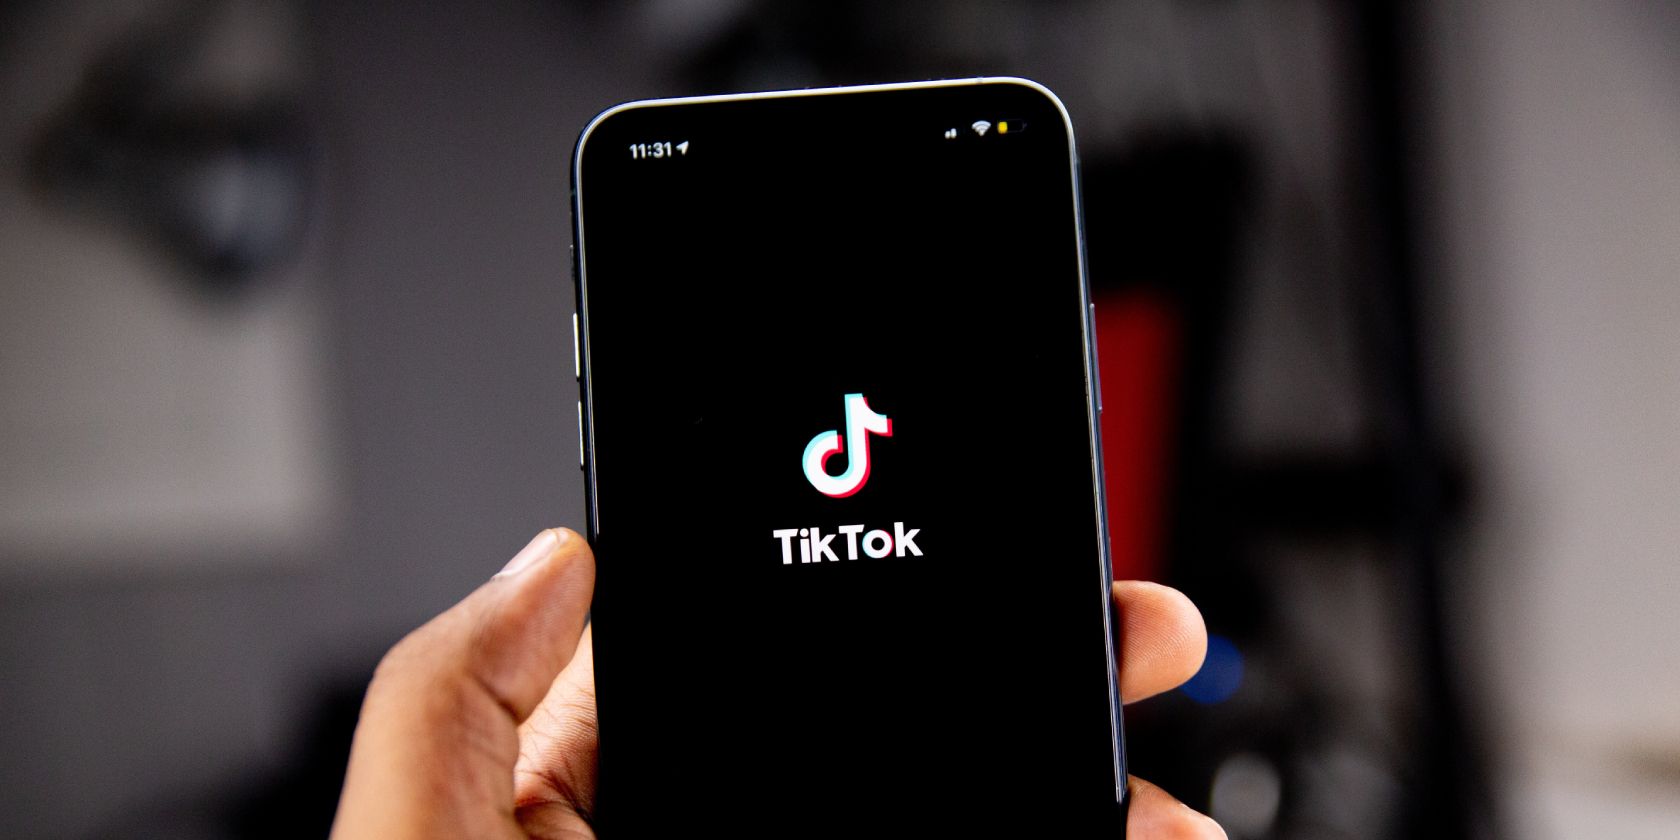 A hand holding a black phone with the TikTok logo on the screen